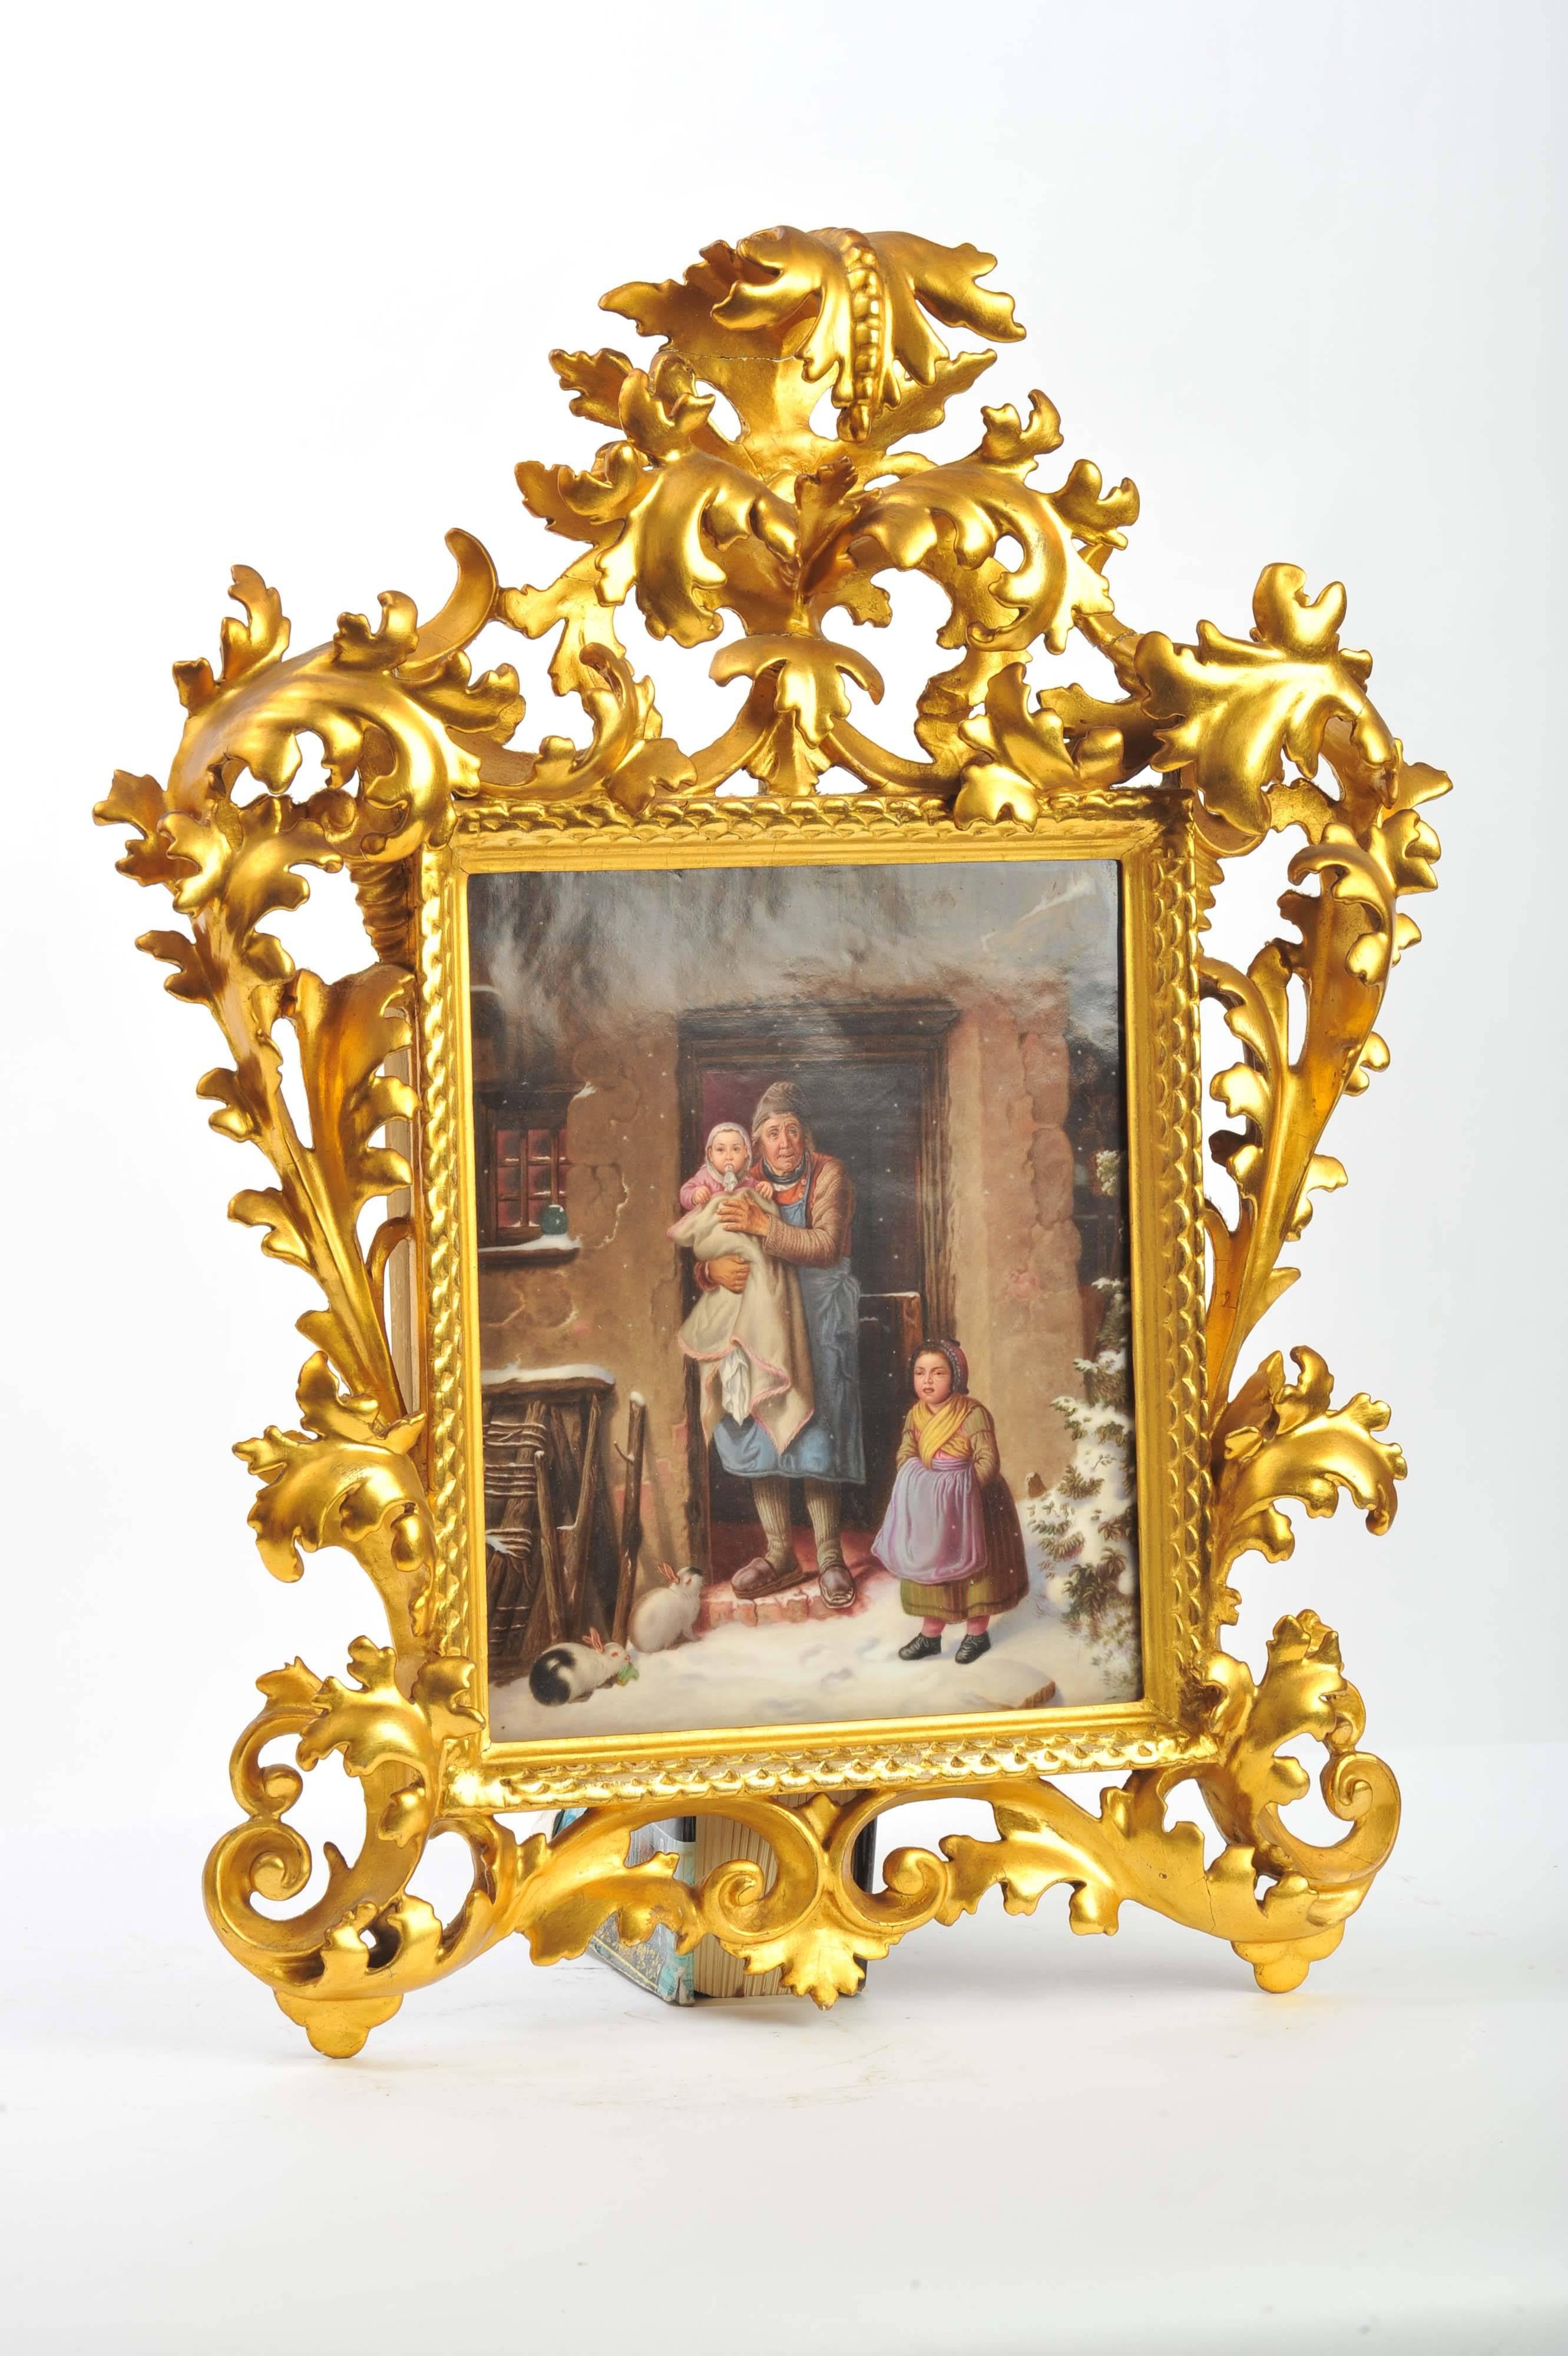 A good quality 19th century KPM porcelain plaque, depicting a mother and her children on a winters days.
Mounted in a 19th century carved giltwood florentine frame.